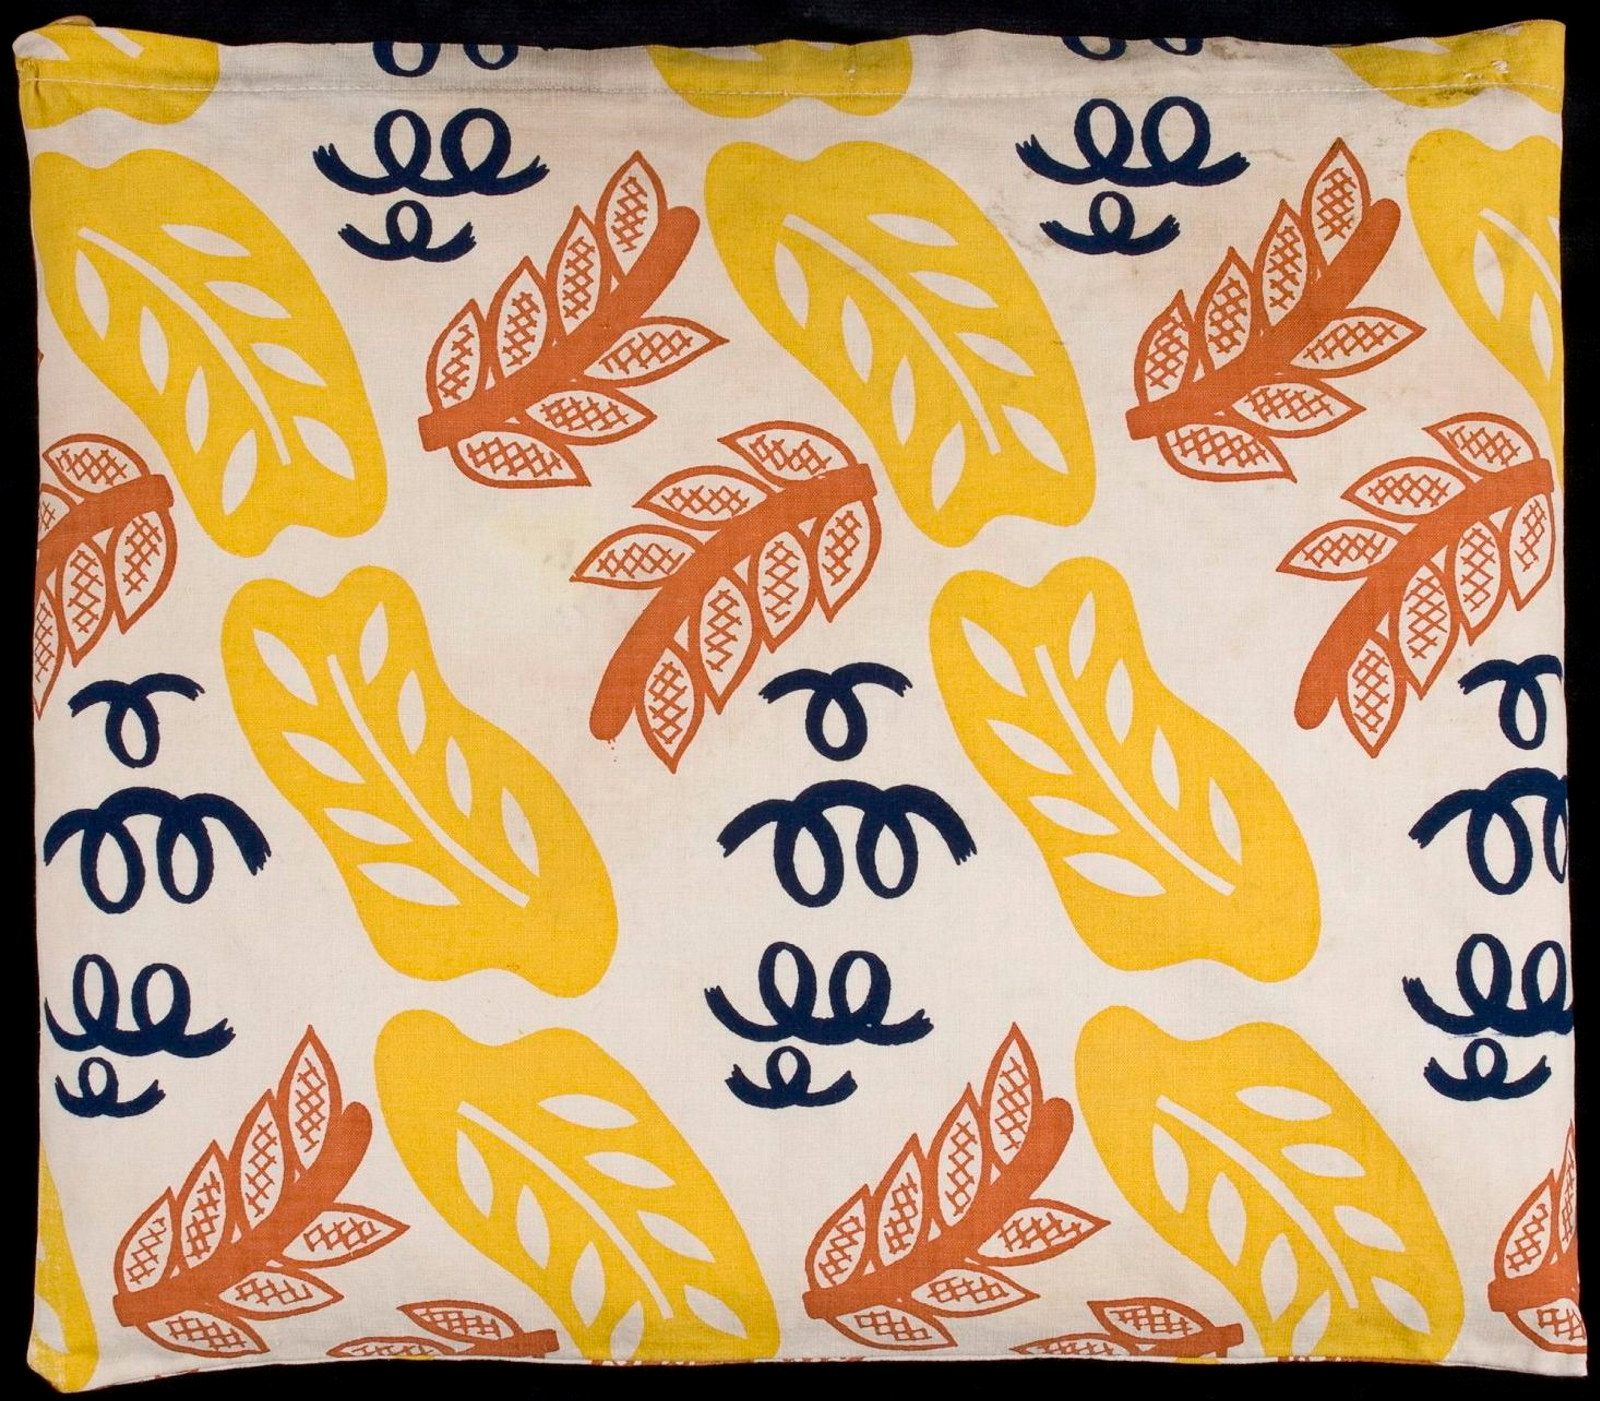 Cushion cover, Leaves design by Amie Kingston for Marion Best Fabrics, Sydney, c1942